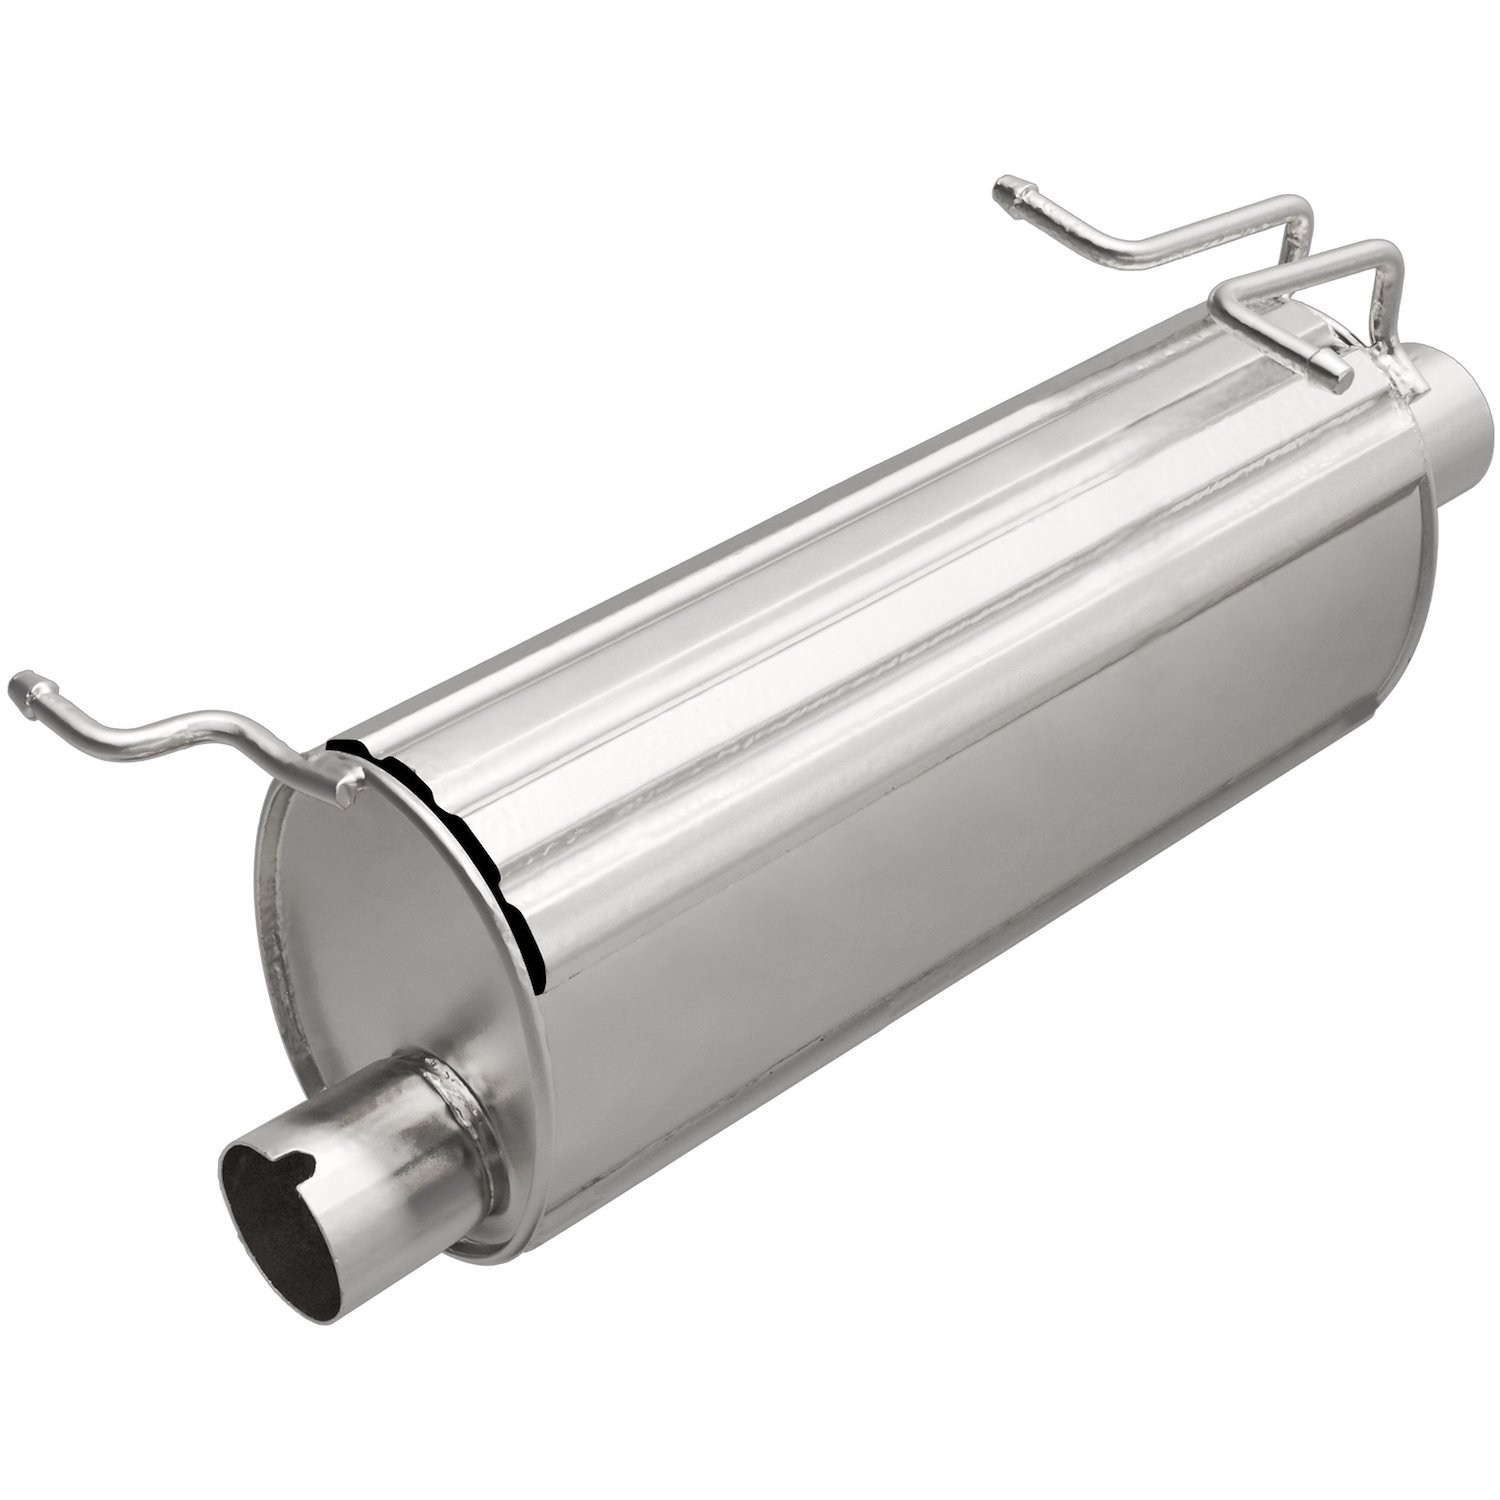 Direct-Fit Exhaust Muffler, 1999-2004 Ford F-250 Super-Duty/F-350